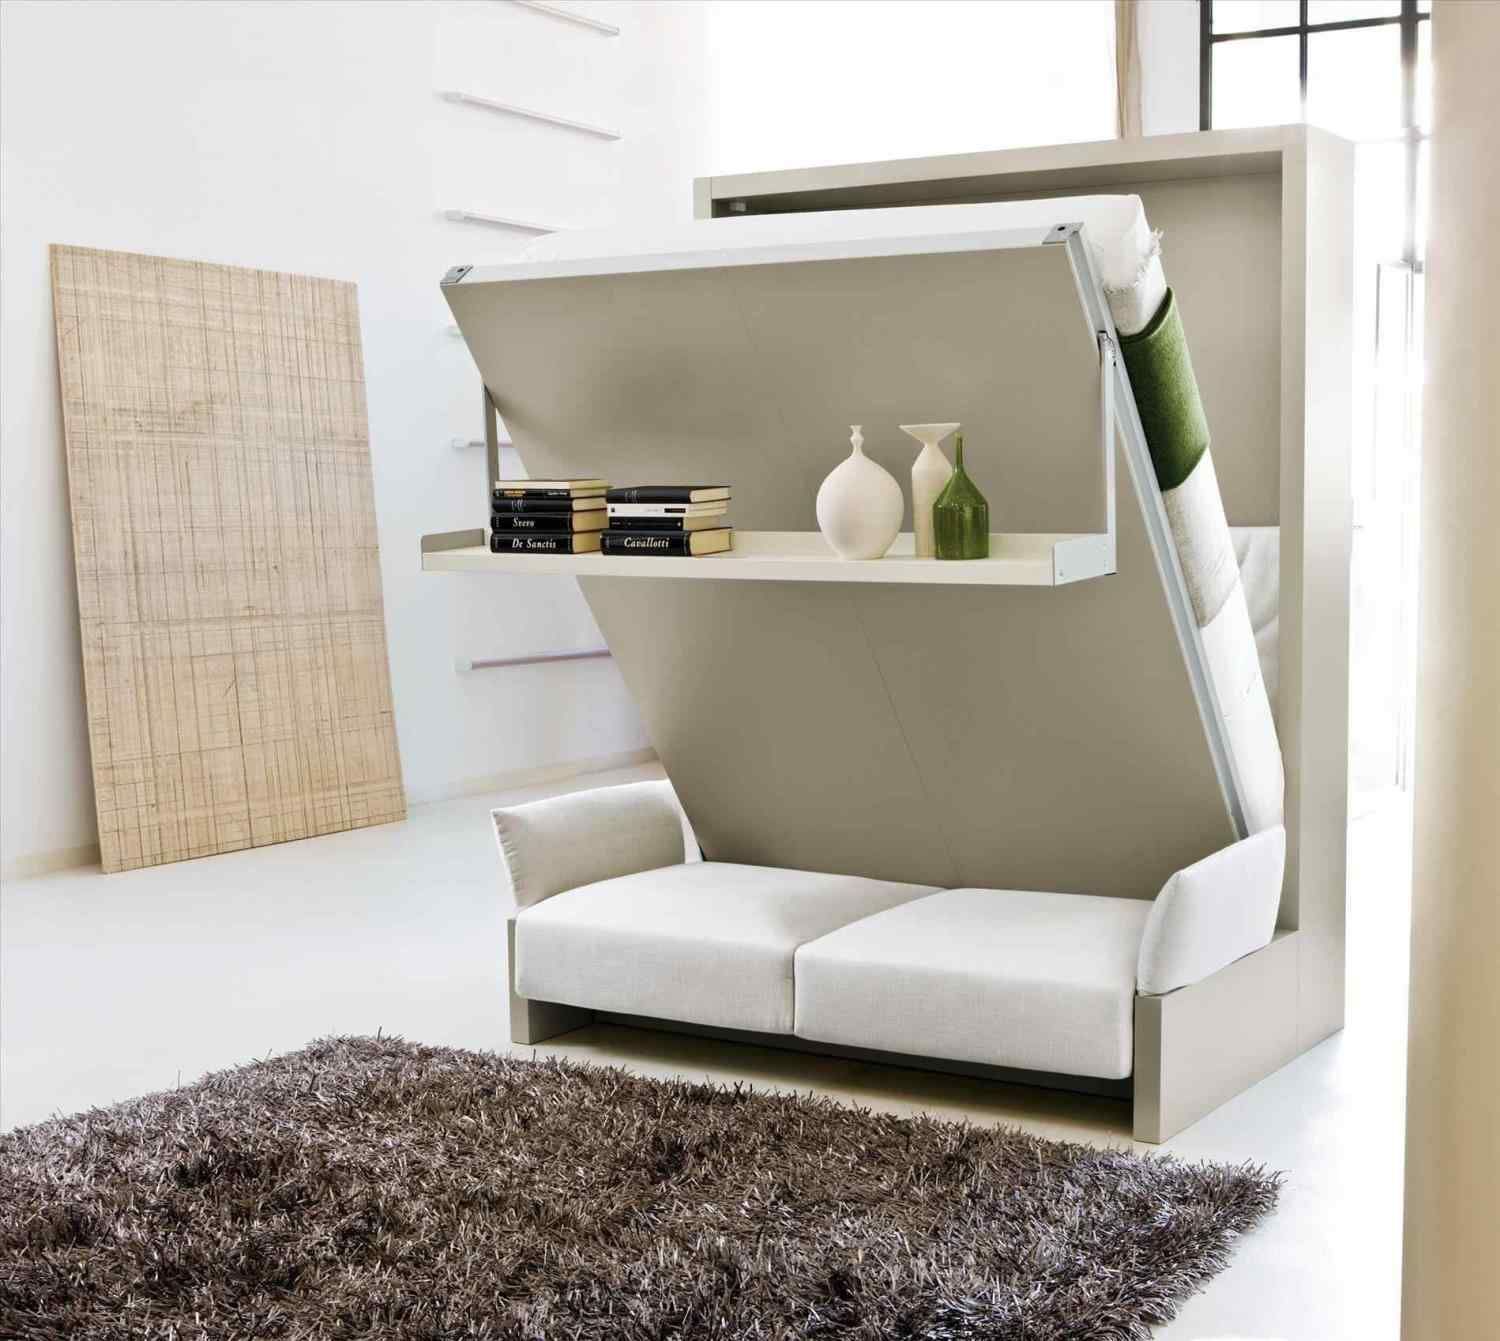 Convertible furniture for the bedroom